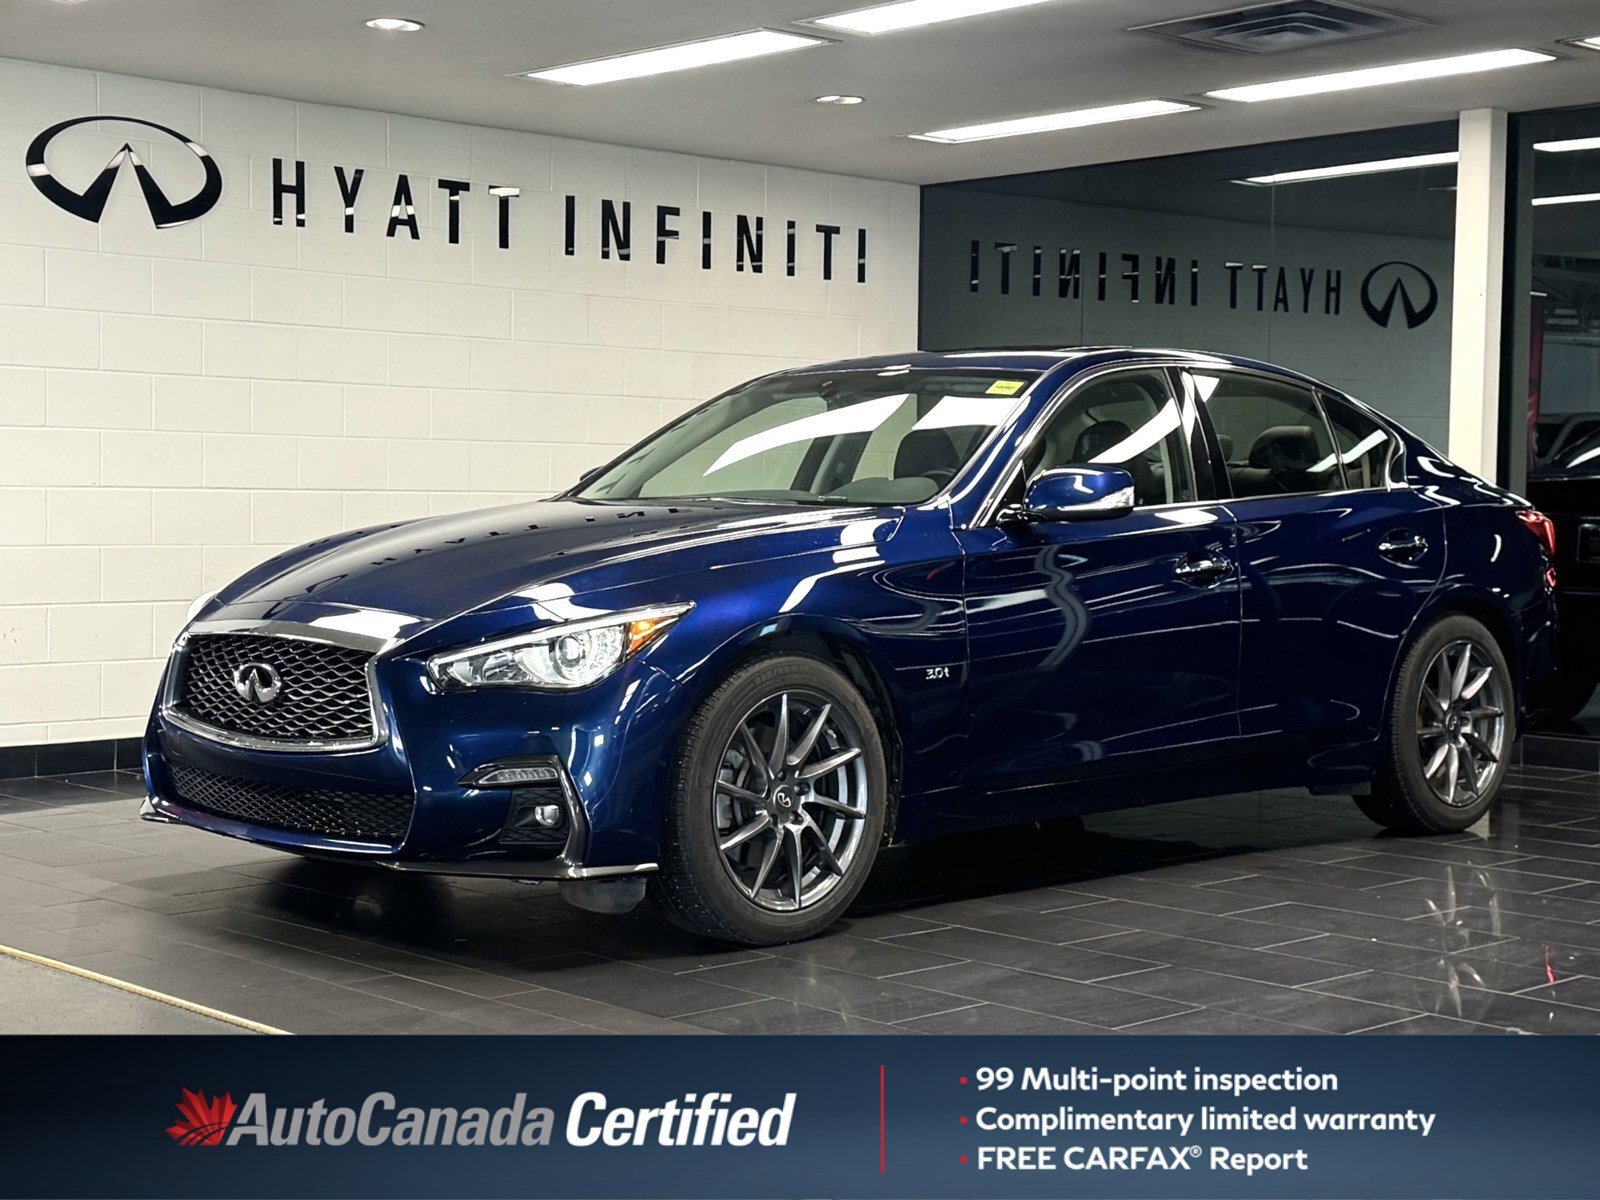 2018 Infiniti Q50 Signature Edition - No Accidents | One Owner | Hea